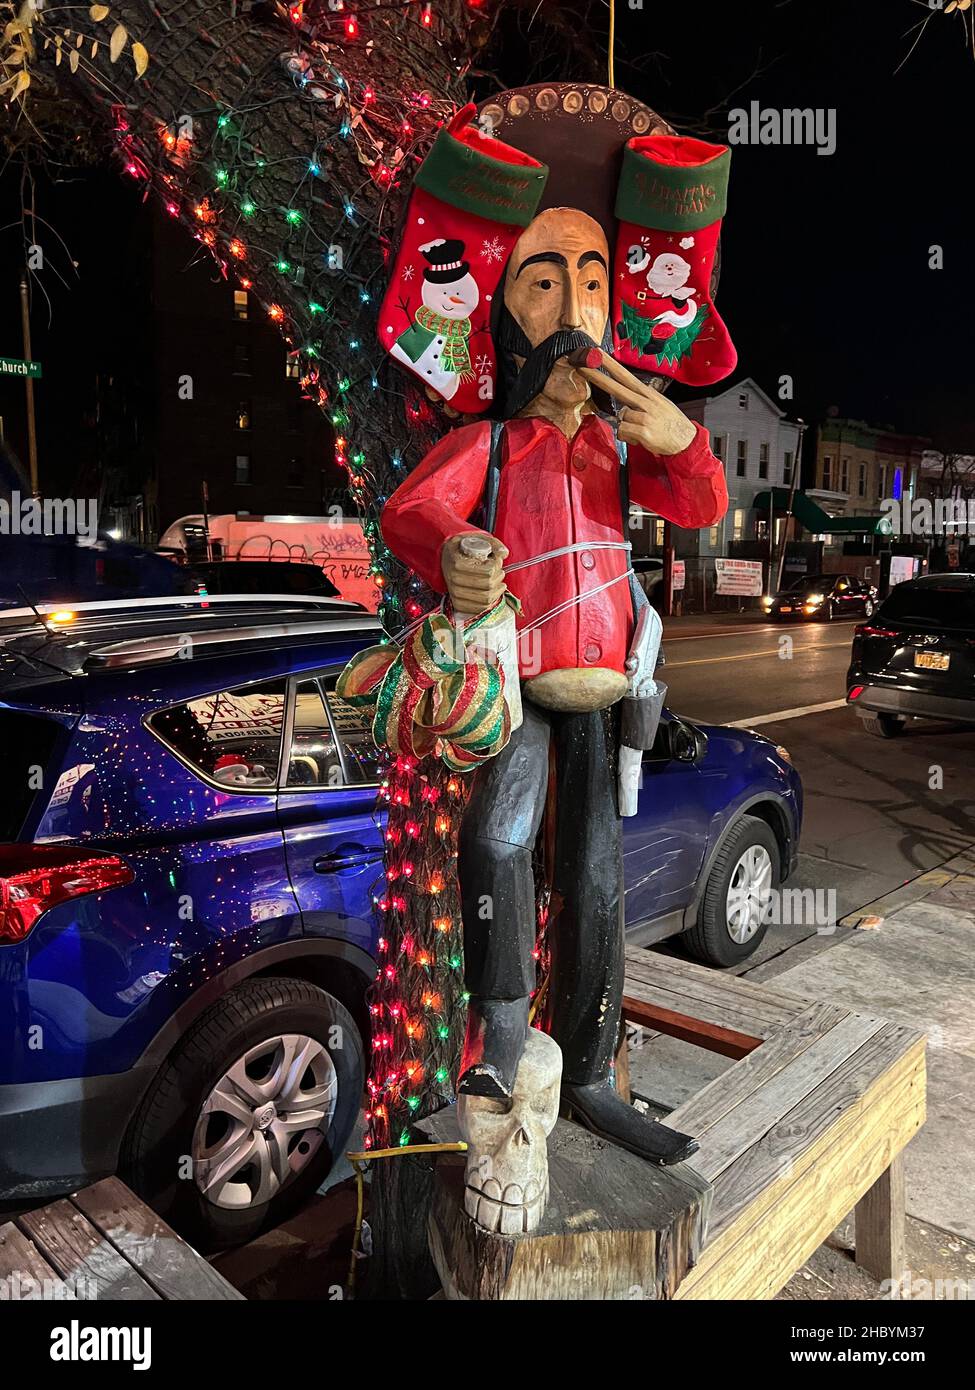 Mexican bandito sculpture outside a bodega in Brooklyn showing the Christmas spirit Stock Photo